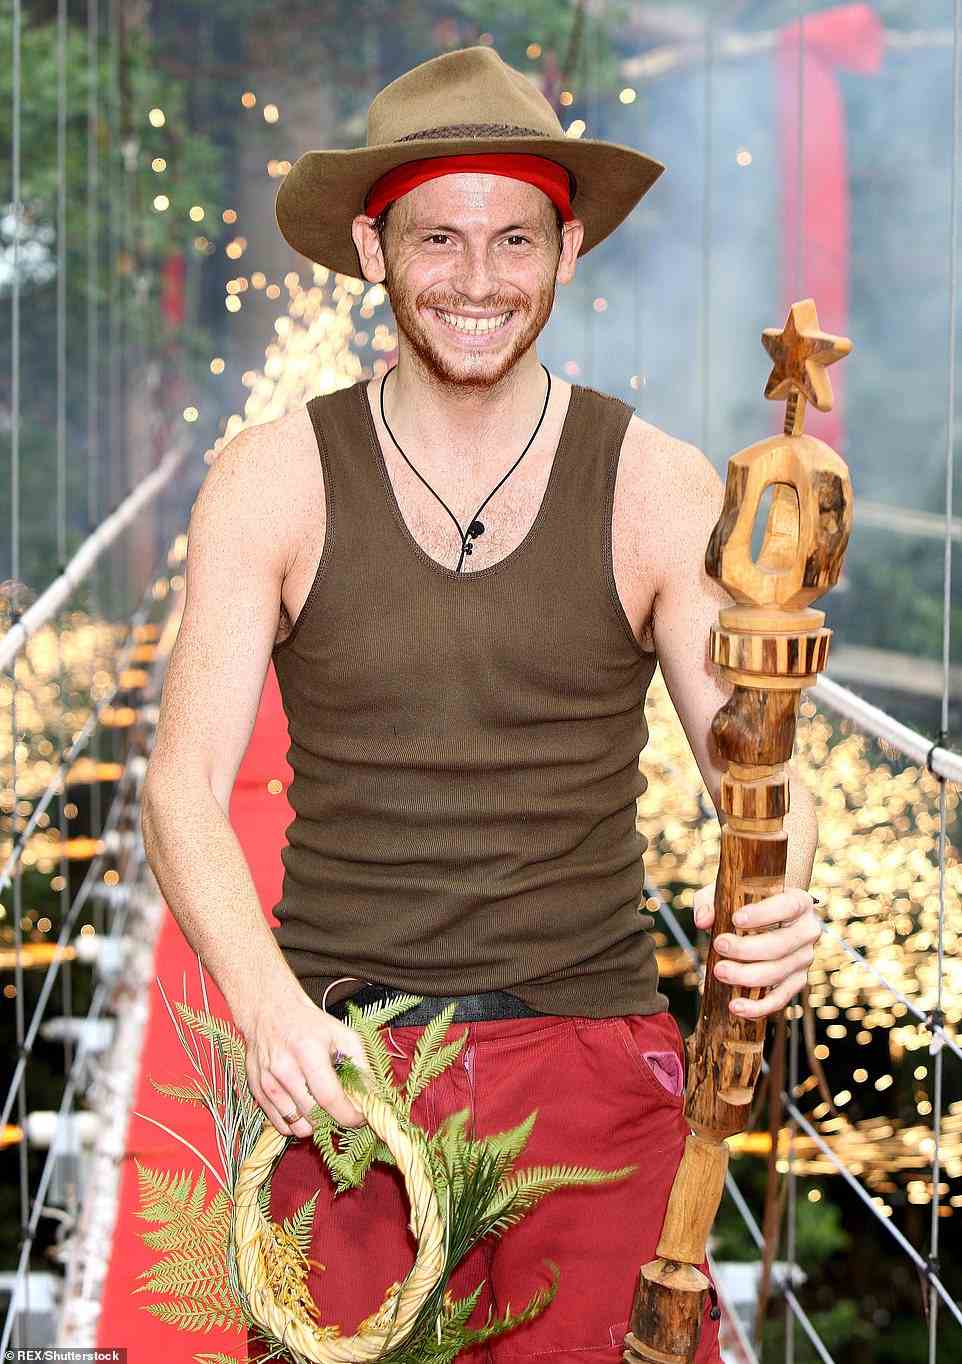 Exciting: Joe Swash, who won the ITV series in 2008 and later presented the spin-off show for ten years, now has a chance to reclaim his crown 14 years later